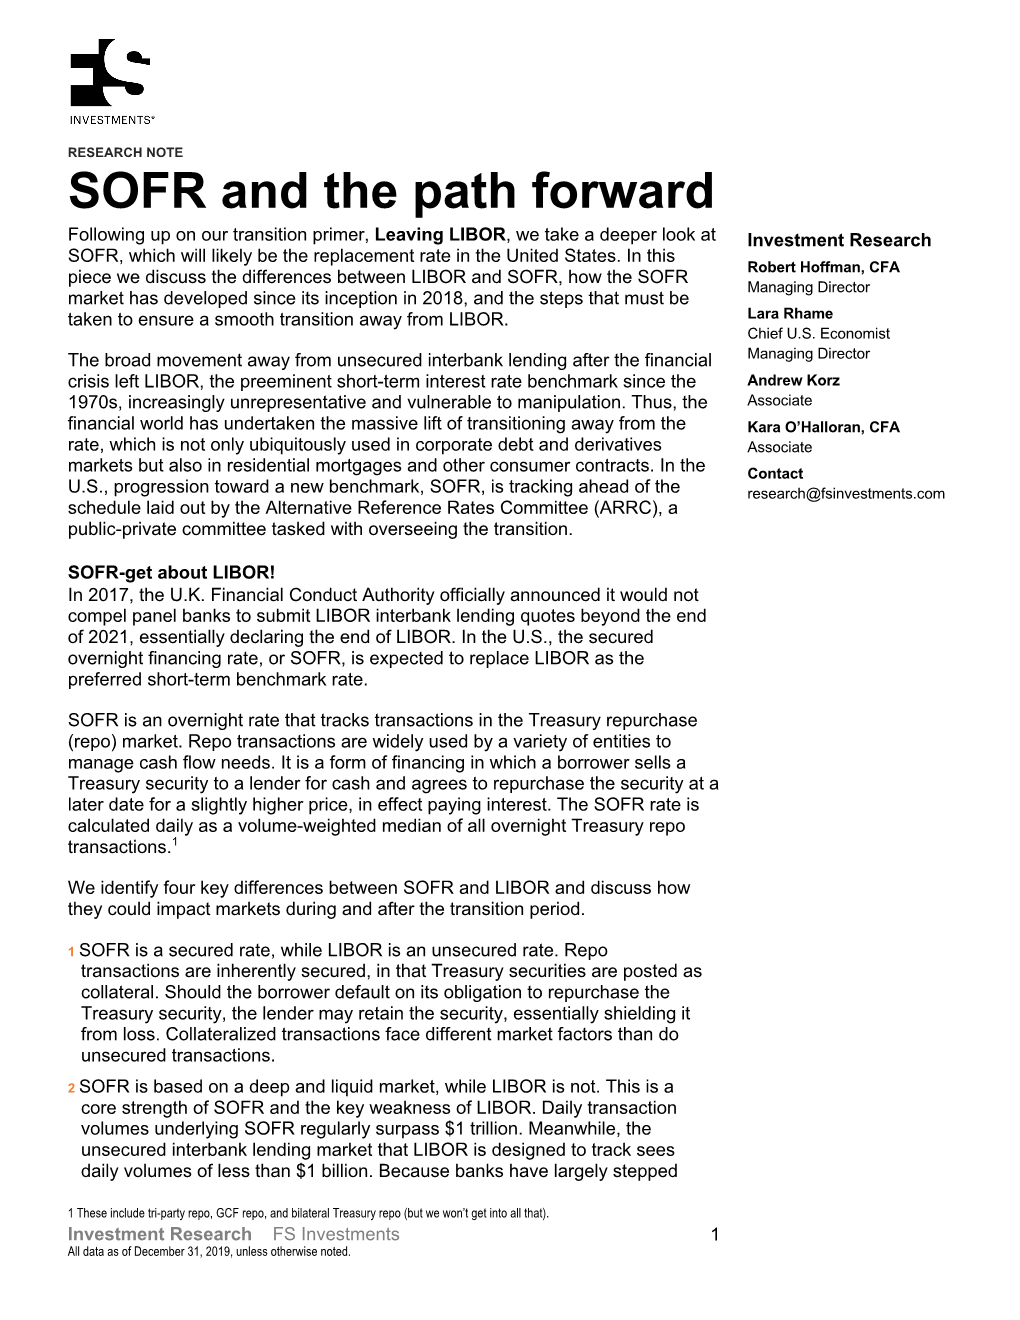 SOFR and the Path Forward